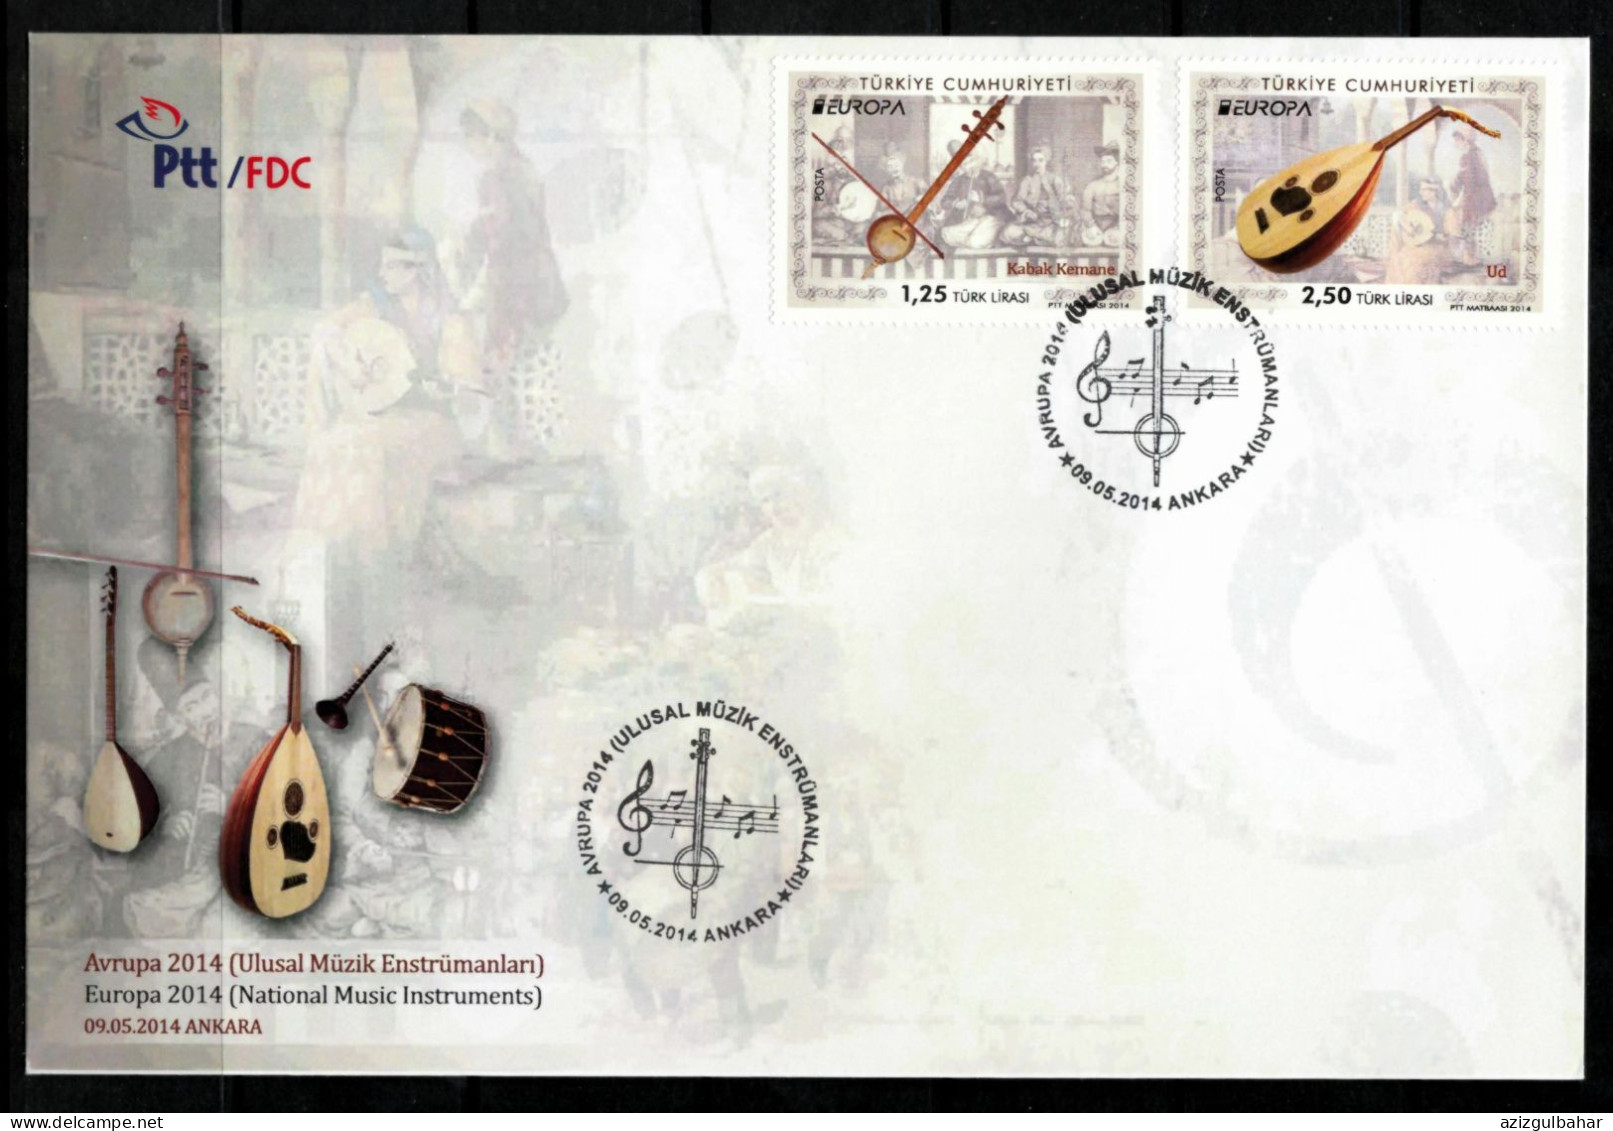 TURKEY - 2014 -EUROPA - NATIONAL MUSICAL INSTRUMENTS - 9 MAY 2014- FDC - 2014